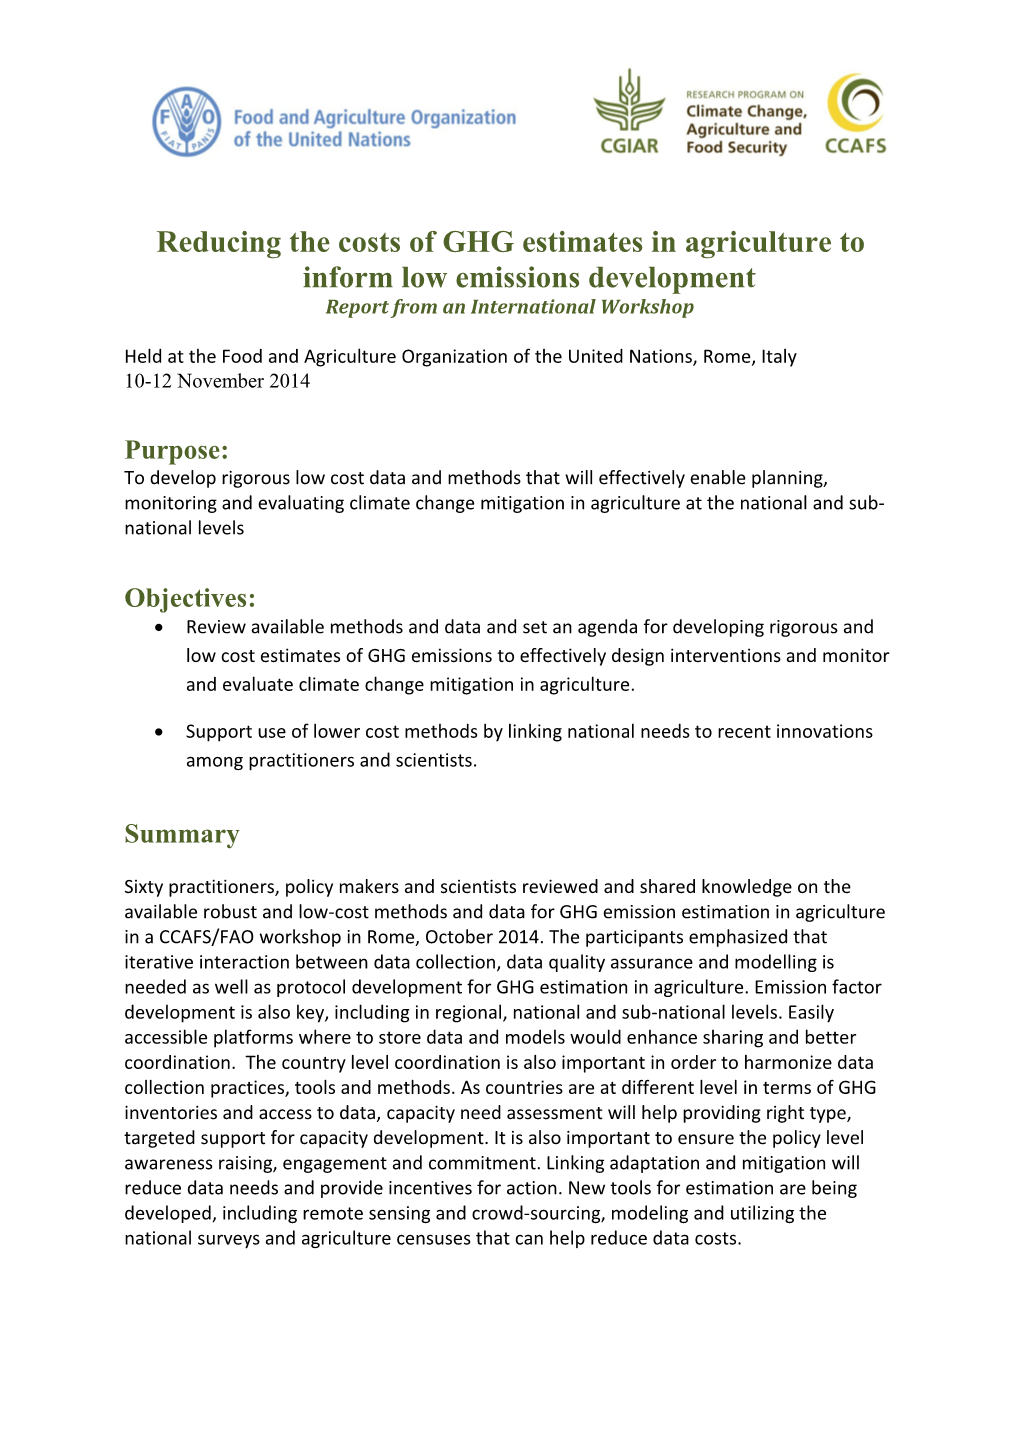 Reducing the Costs of GHG Estimates in Agriculture to Inform Low Emissions Development